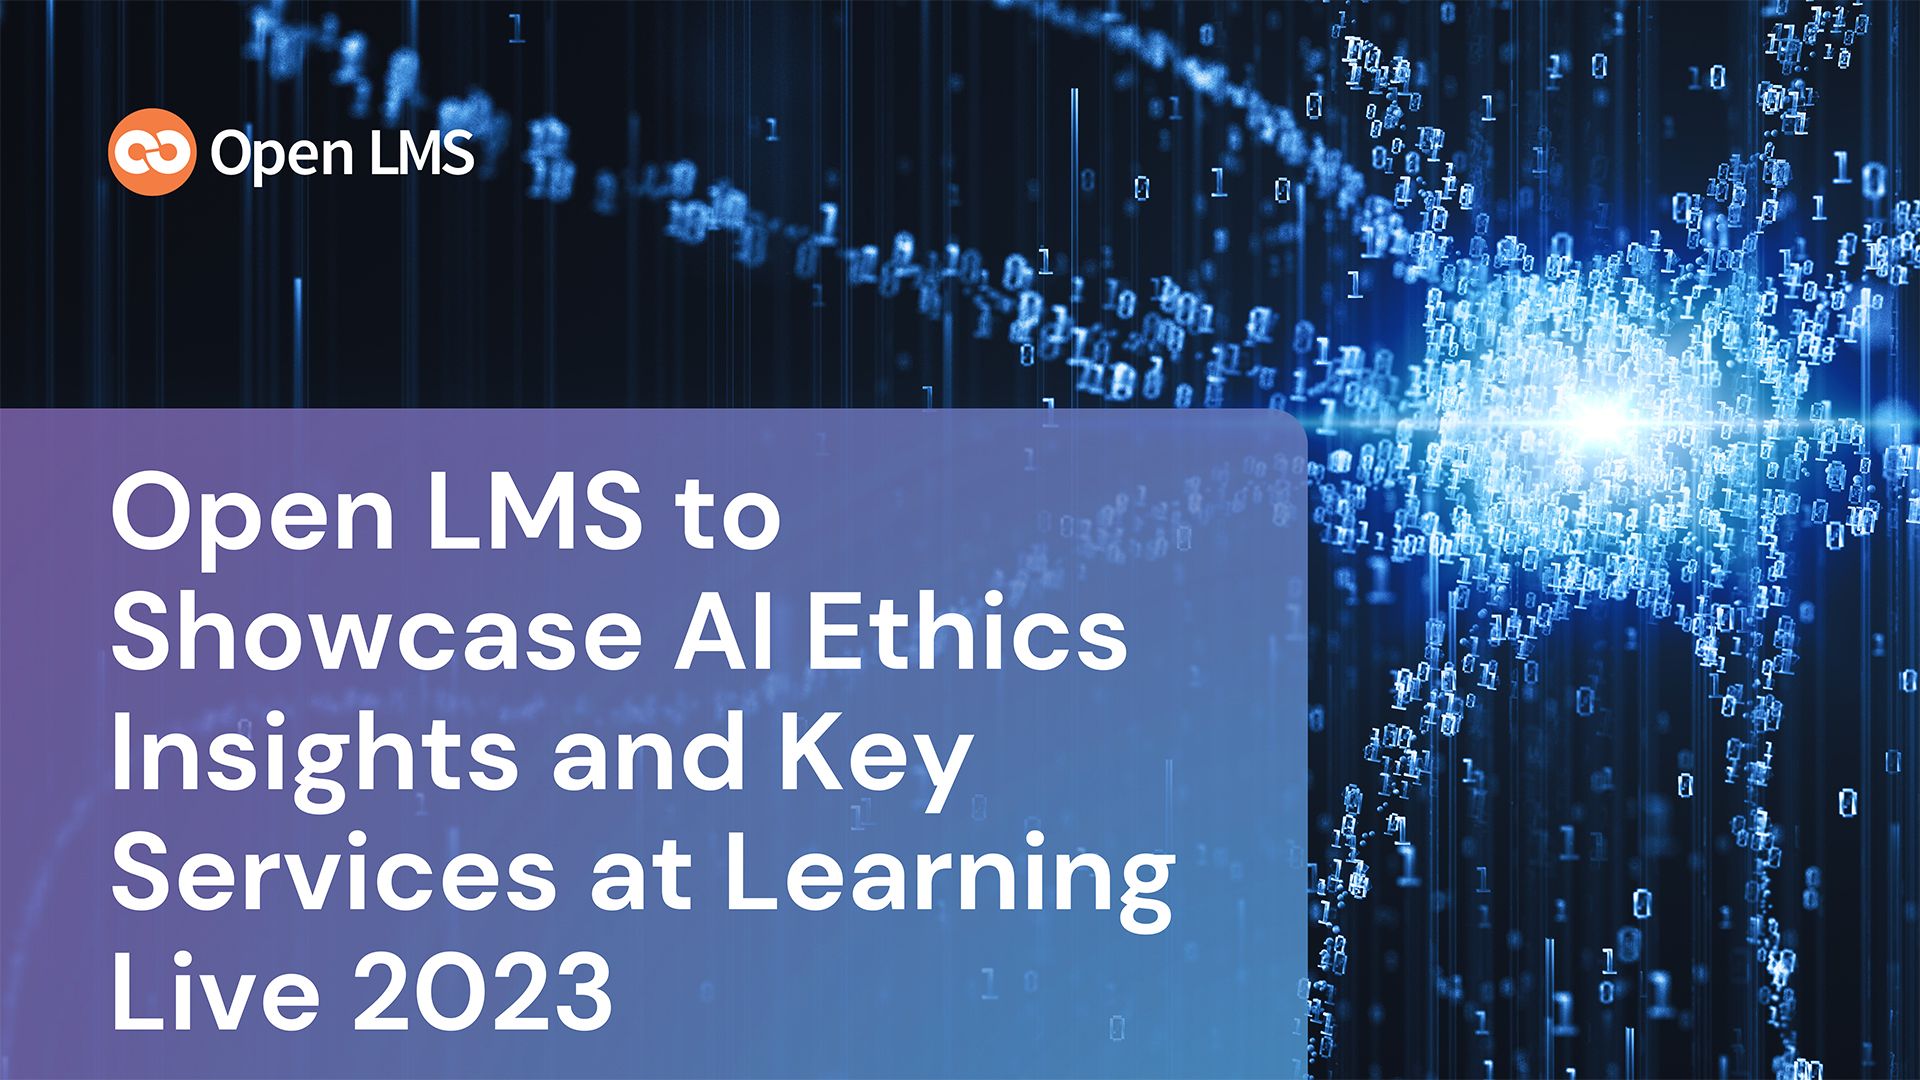 Open LMS to Showcase AI Ethics Insights and Key Services at Learning Live 2023